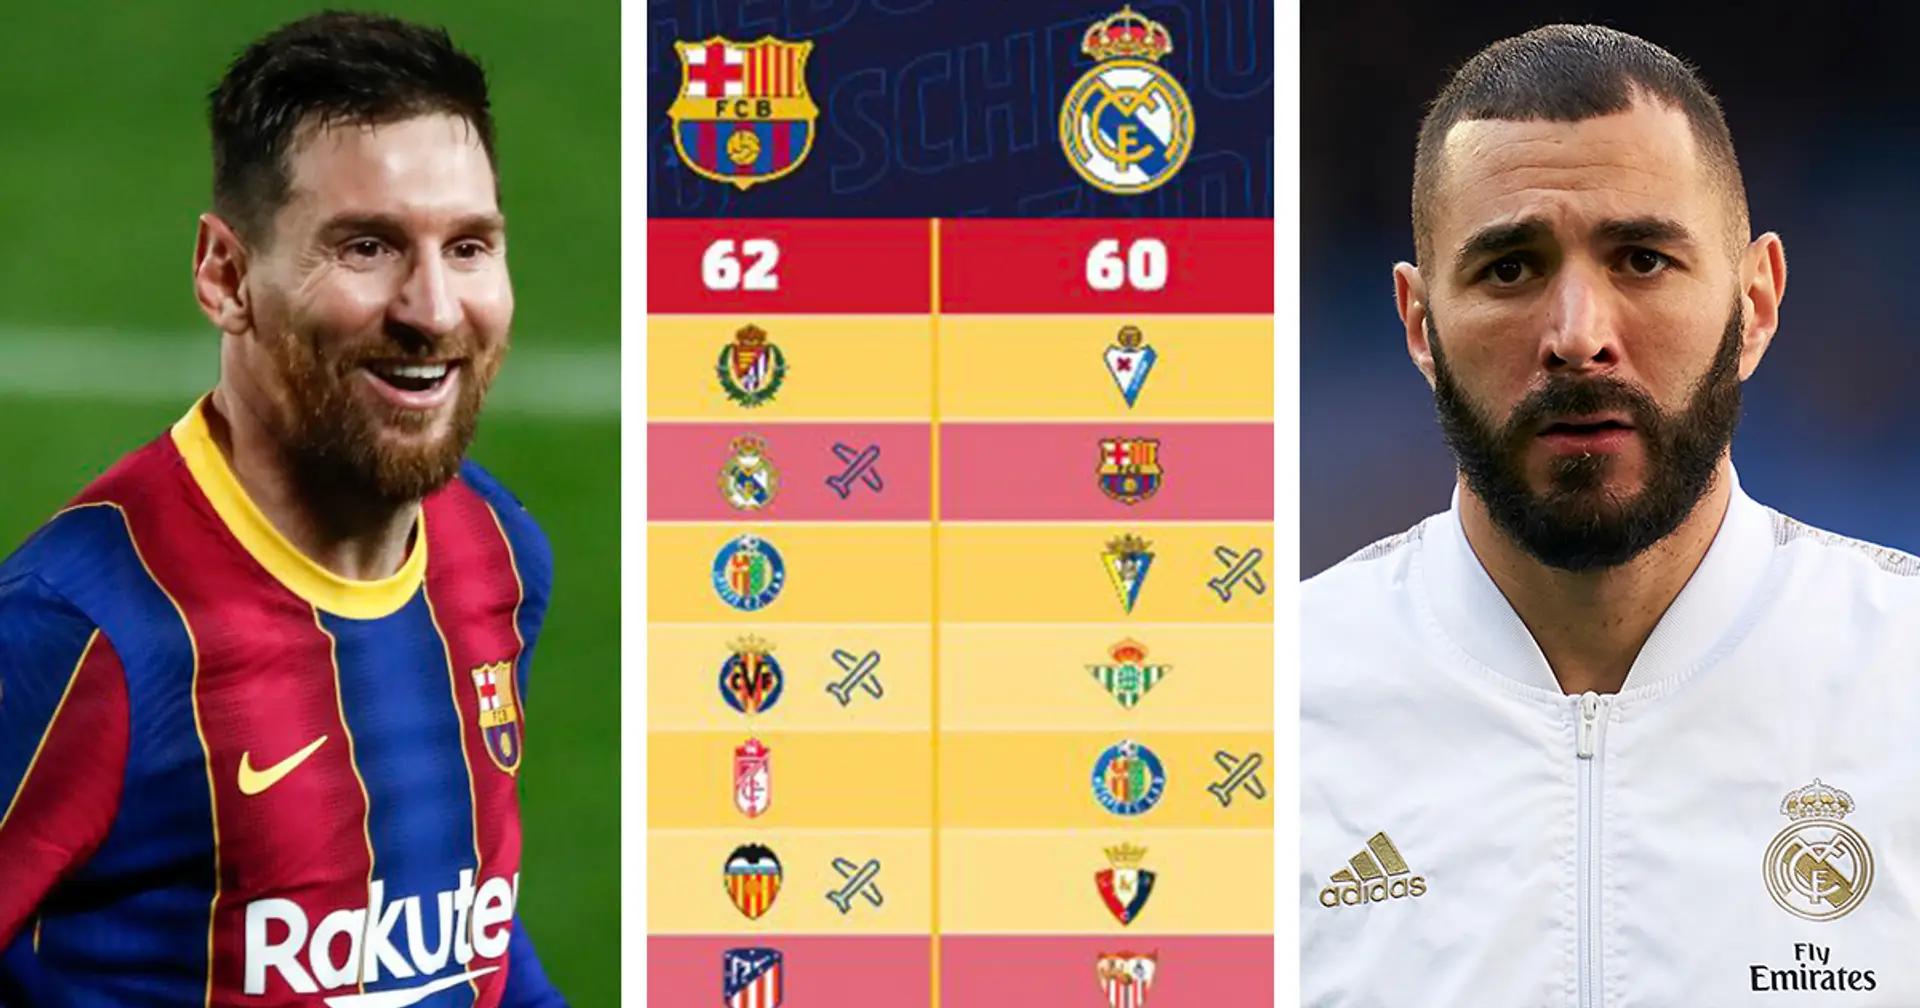 10 games left: Taking a look at La Liga schedules of Barca, Atletico and Real Madrid